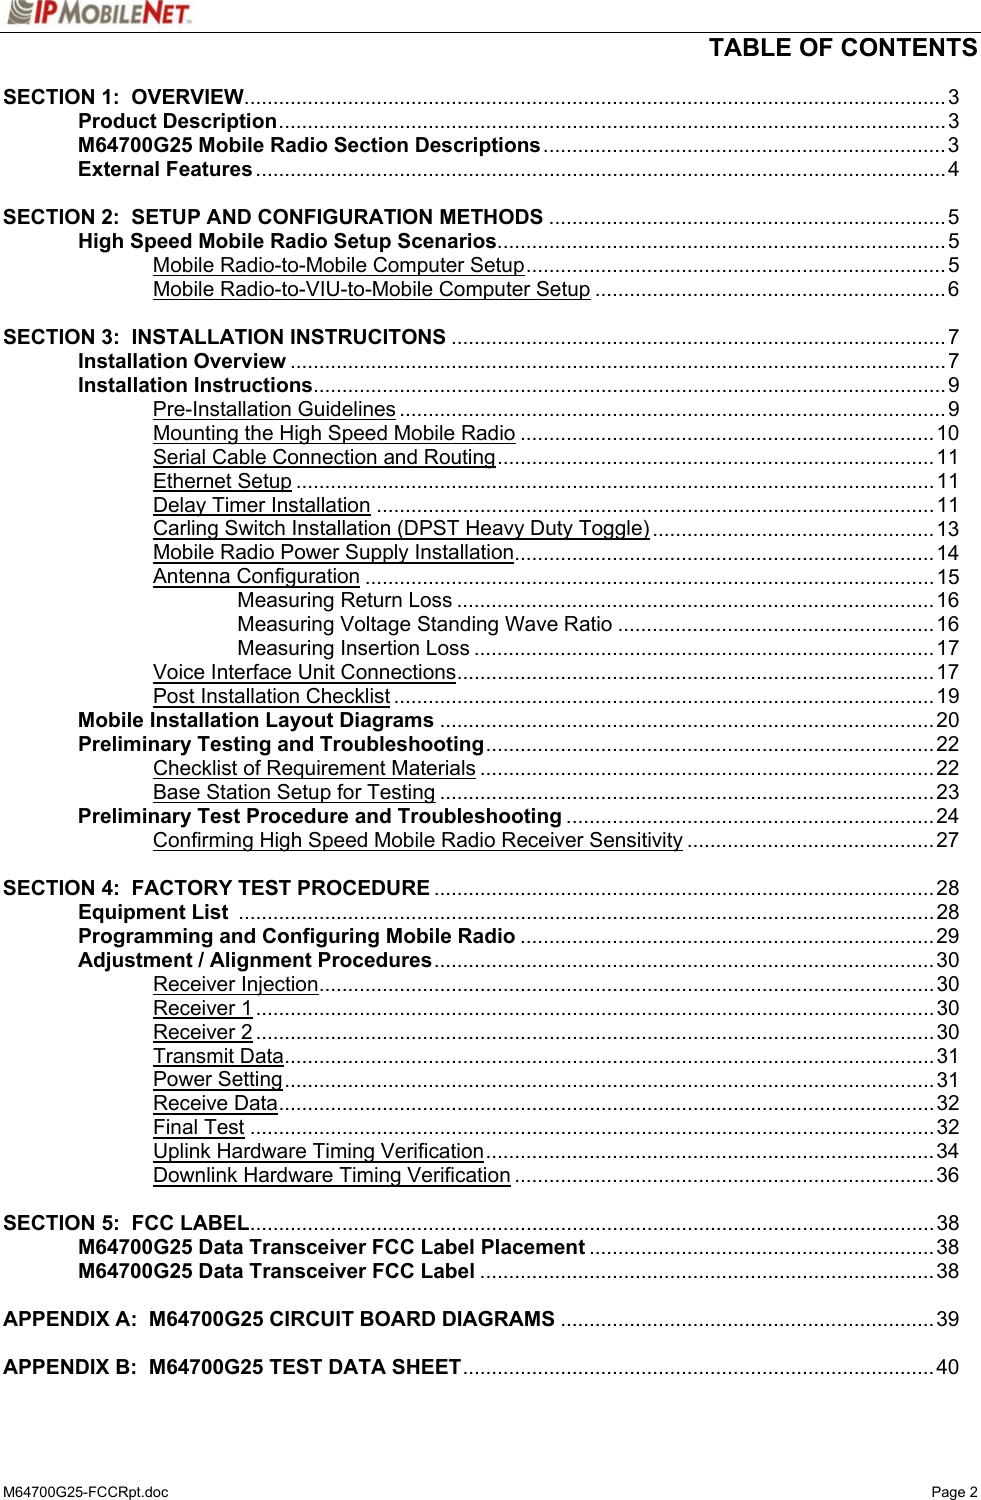   TABLE OF CONTENTS  M64700G25-FCCRpt.doc   Page 2 SECTION 1:  OVERVIEW..........................................................................................................................3  Product Description....................................................................................................................3  M64700G25 Mobile Radio Section Descriptions......................................................................3  External Features........................................................................................................................4    SECTION 2:  SETUP AND CONFIGURATION METHODS .....................................................................5   High Speed Mobile Radio Setup Scenarios..............................................................................5   Mobile Radio-to-Mobile Computer Setup......................................................................... 5     Mobile Radio-to-VIU-to-Mobile Computer Setup .............................................................6  SECTION 3:  INSTALLATION INSTRUCITONS ......................................................................................7  Installation Overview ..................................................................................................................7  Installation Instructions..............................................................................................................9   Pre-Installation Guidelines ............................................................................................... 9     Mounting the High Speed Mobile Radio ........................................................................10     Serial Cable Connection and Routing............................................................................11   Ethernet Setup ...............................................................................................................11   Delay Timer Installation .................................................................................................11     Carling Switch Installation (DPST Heavy Duty Toggle) .................................................13     Mobile Radio Power Supply Installation.........................................................................14   Antenna Configuration ................................................................................................... 15     Measuring Return Loss ...................................................................................16     Measuring Voltage Standing Wave Ratio .......................................................16     Measuring Insertion Loss ................................................................................17     Voice Interface Unit Connections...................................................................................17   Post Installation Checklist ..............................................................................................19  Mobile Installation Layout Diagrams ......................................................................................20  Preliminary Testing and Troubleshooting..............................................................................22   Checklist of Requirement Materials ...............................................................................22     Base Station Setup for Testing ......................................................................................23  Preliminary Test Procedure and Troubleshooting ................................................................24   Confirming High Speed Mobile Radio Receiver Sensitivity ...........................................27  SECTION 4:  FACTORY TEST PROCEDURE .......................................................................................28  Equipment List .........................................................................................................................28   Programming and Configuring Mobile Radio ........................................................................ 29   Adjustment / Alignment Procedures....................................................................................... 30   Receiver Injection...........................................................................................................30   Receiver 1......................................................................................................................30   Receiver 2......................................................................................................................30   Transmit Data.................................................................................................................31   Power Setting................................................................................................................. 31   Receive Data..................................................................................................................32   Final Test .......................................................................................................................32     Uplink Hardware Timing Verification..............................................................................34     Downlink Hardware Timing Verification .........................................................................36  SECTION 5:  FCC LABEL.......................................................................................................................38   M64700G25 Data Transceiver FCC Label Placement ............................................................ 38  M64700G25 Data Transceiver FCC Label ...............................................................................38  APPENDIX A:  M64700G25 CIRCUIT BOARD DIAGRAMS .................................................................39  APPENDIX B:  M64700G25 TEST DATA SHEET..................................................................................40 